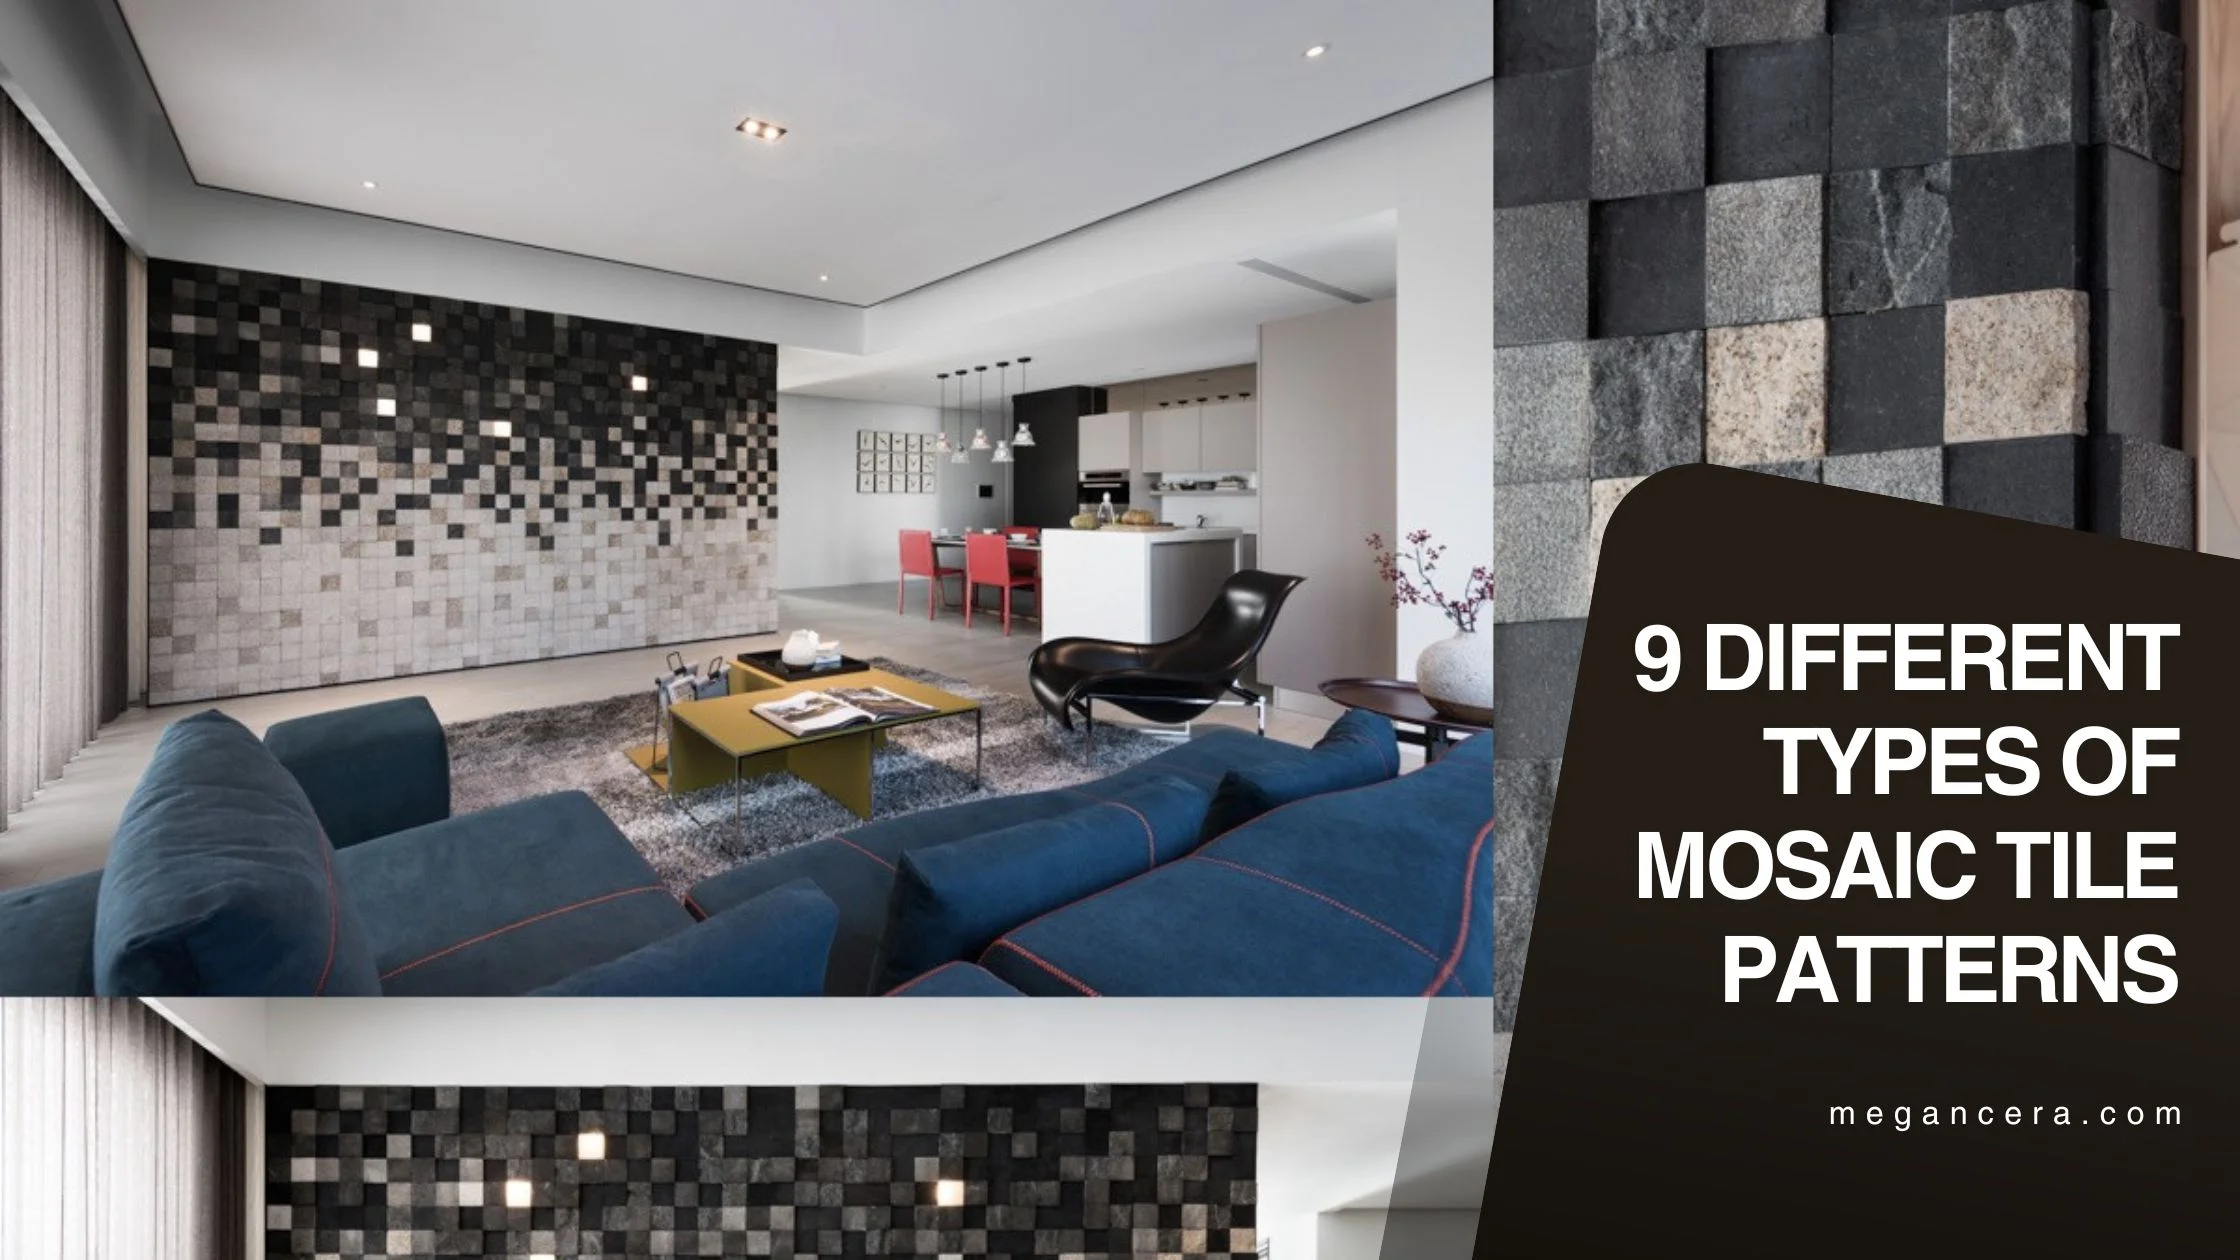 9 Different Types of Mosaic Tile Patterns